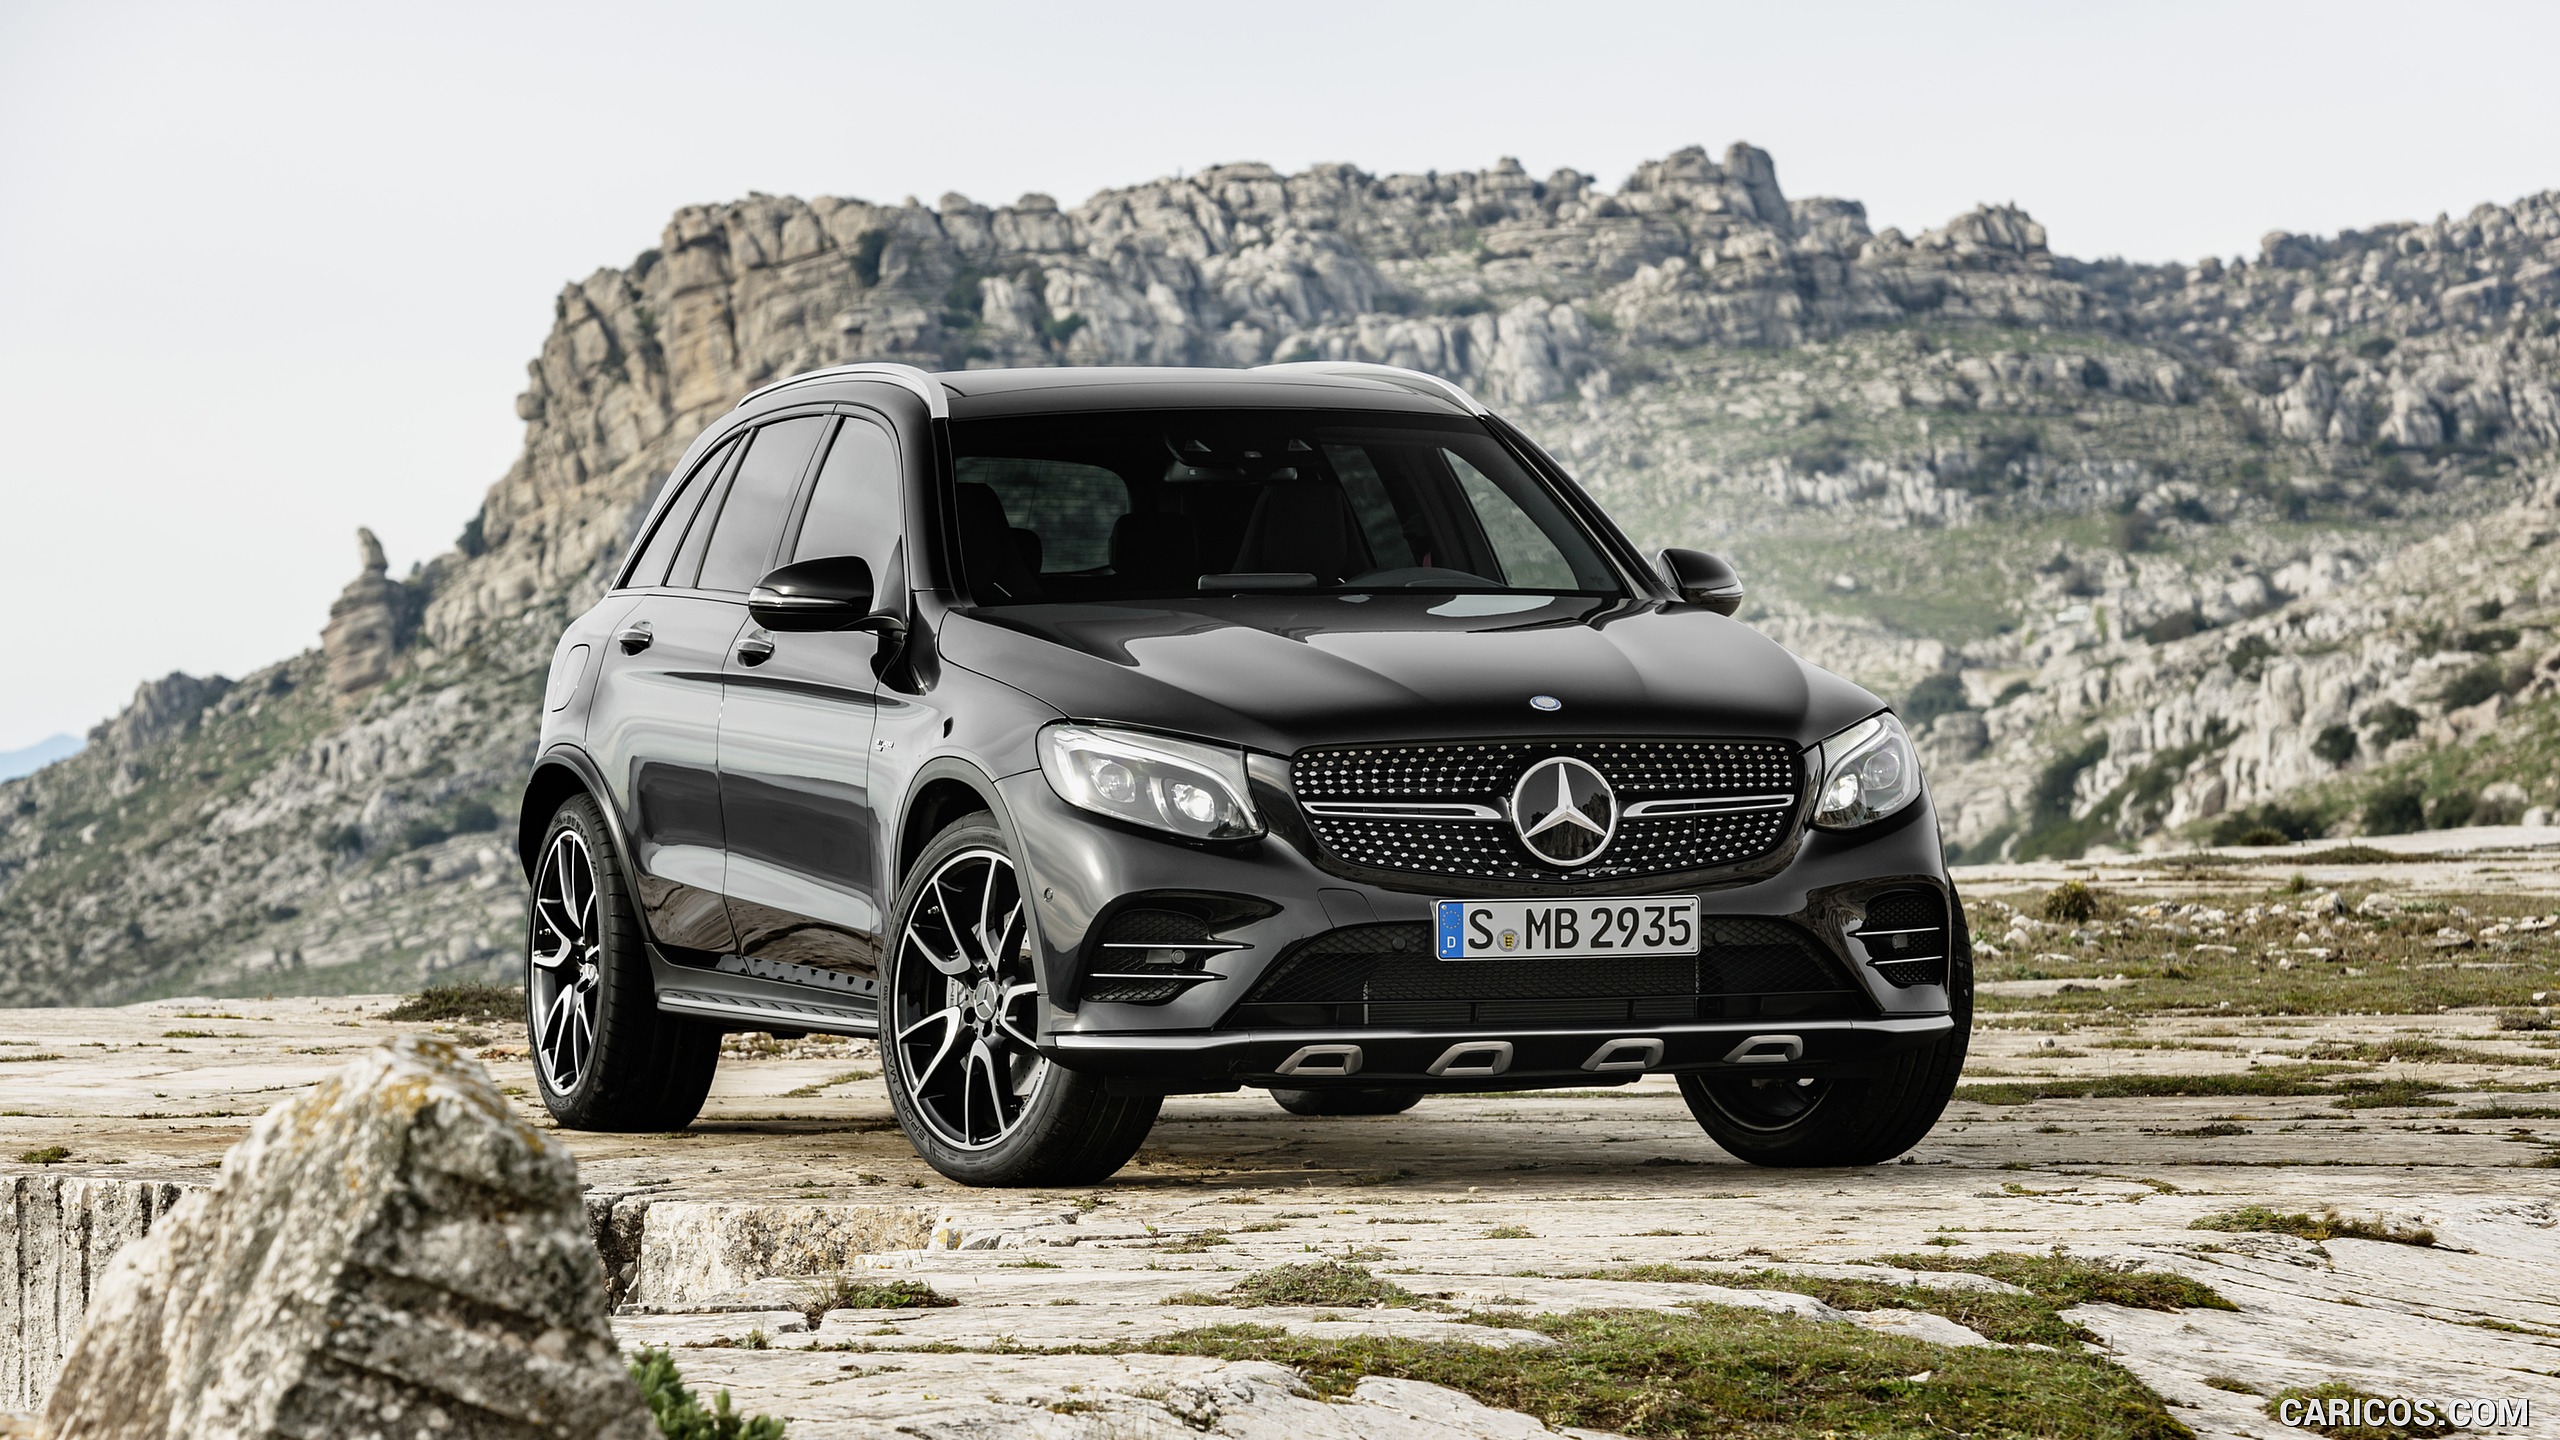 2017 Mercedes-AMG GLC 43 4MATIC (Chassis: X253, Color: Obsidian Black) - Front, #1 of 108